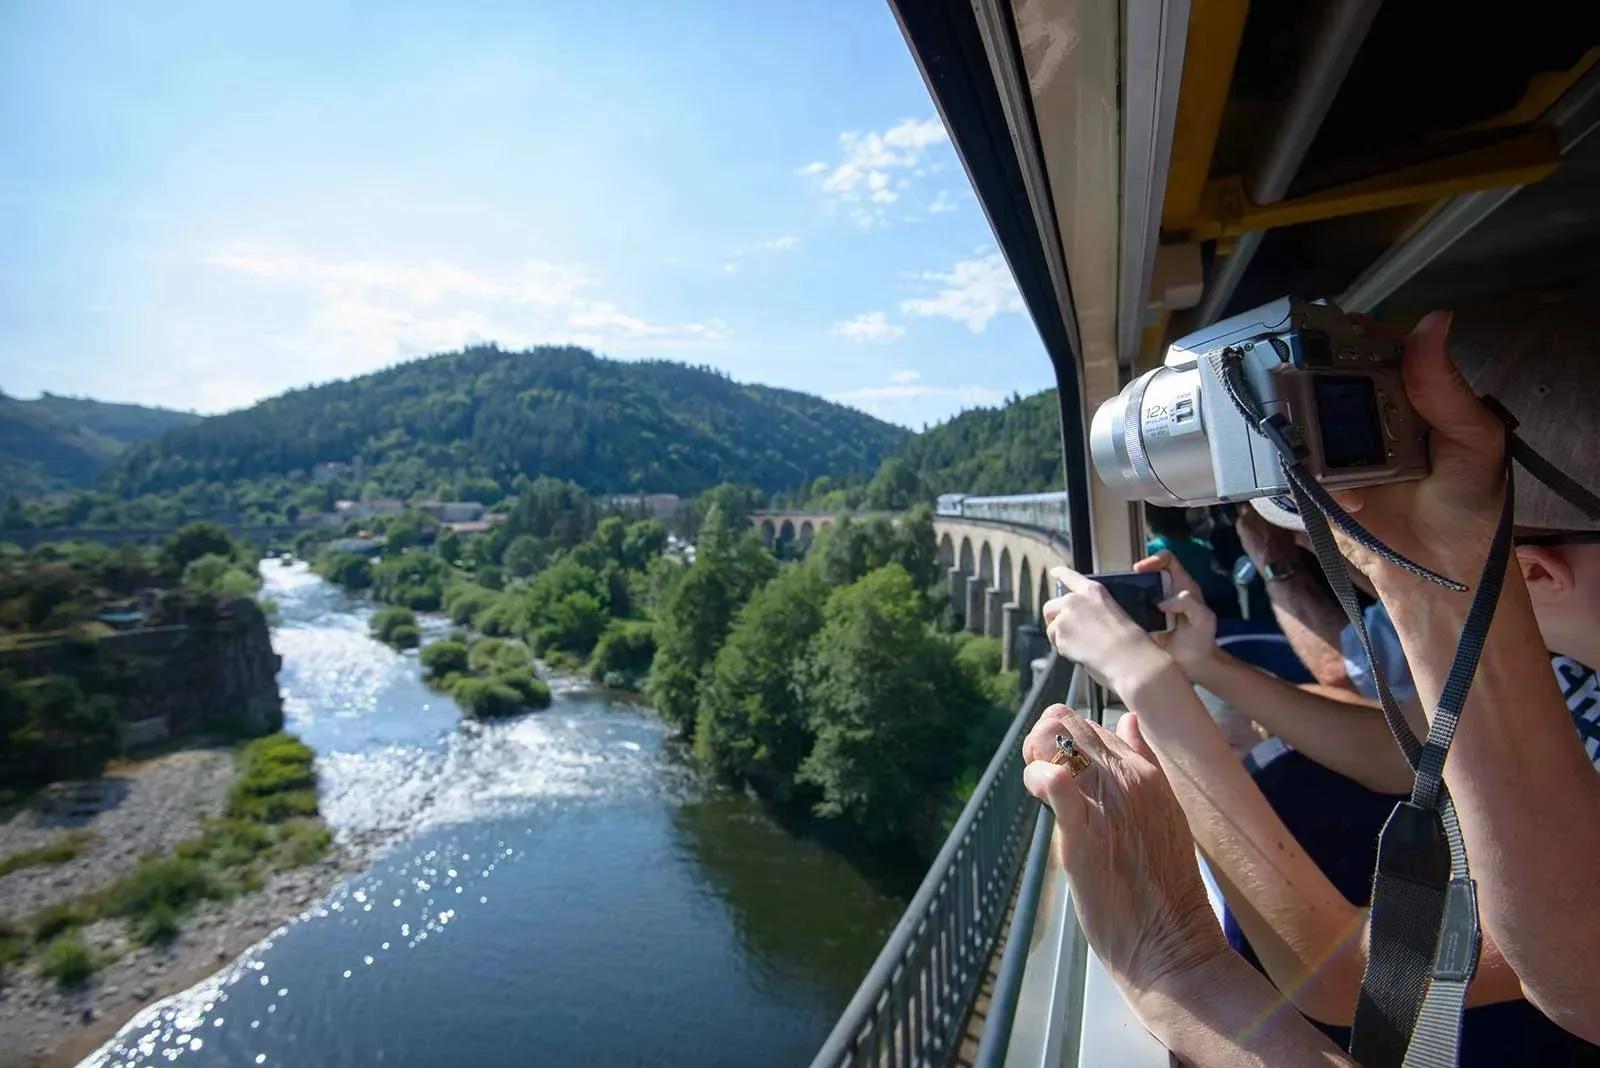 People on a train take photos of the river passing below in Haute-Loire, Auvergne